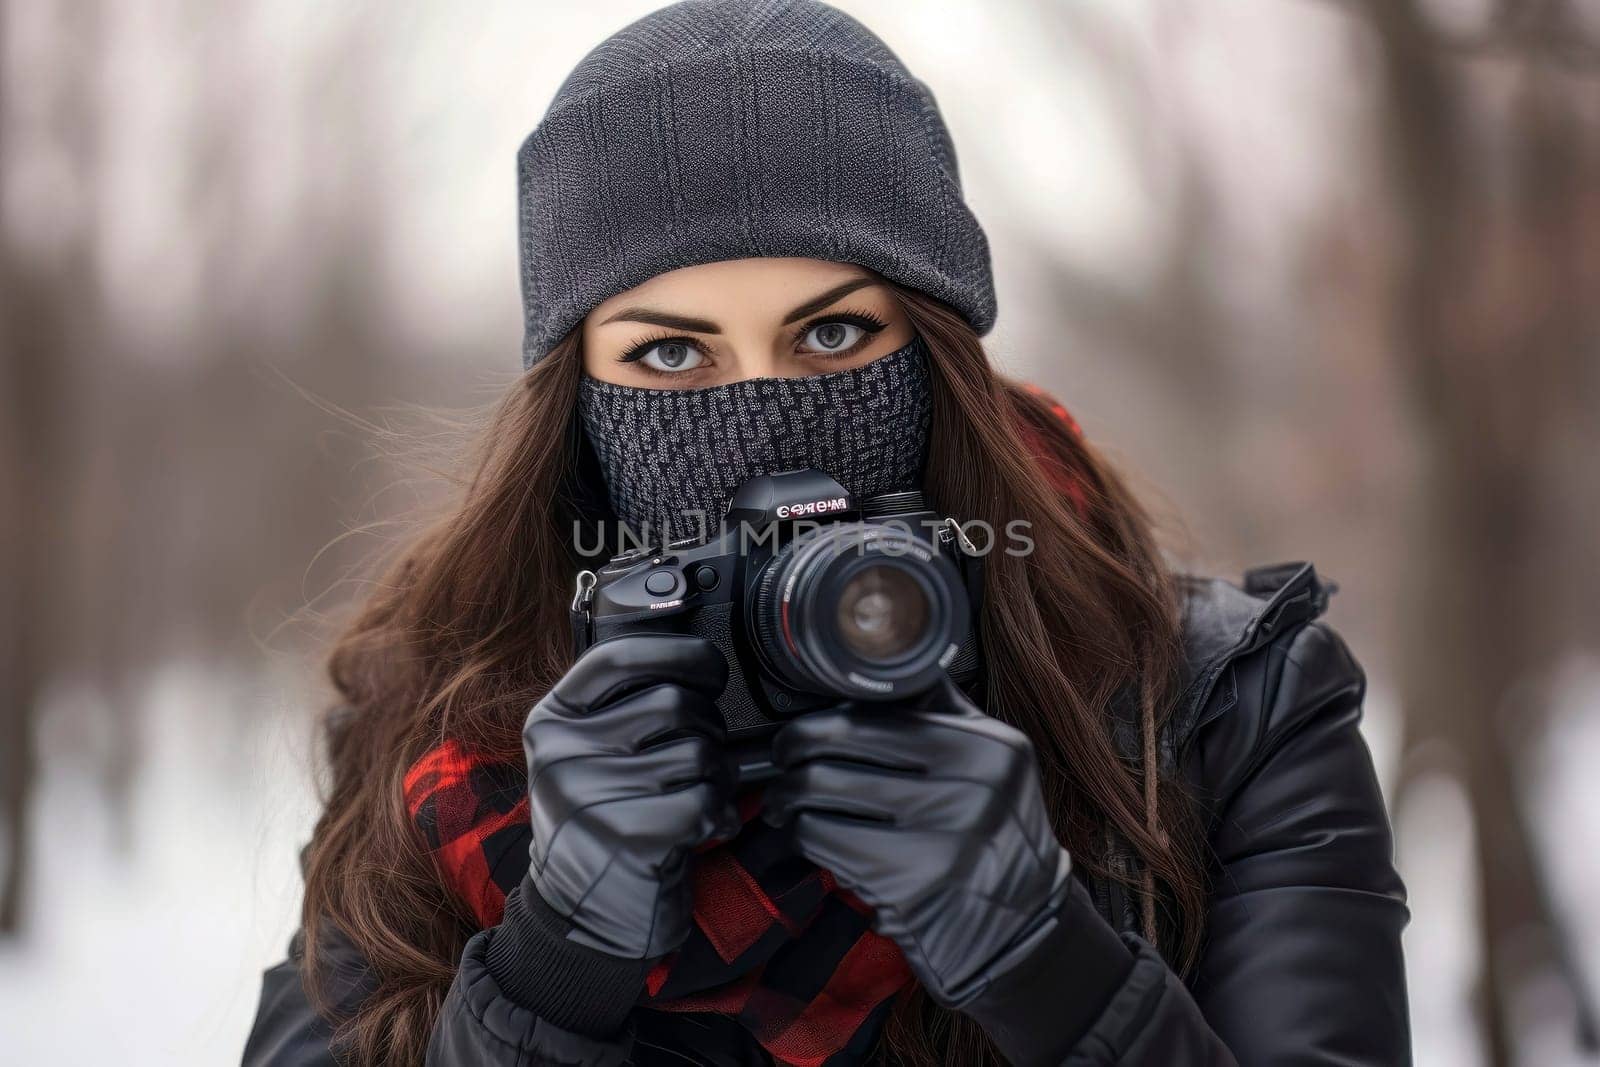 Image of a photographer braving the cold weather, holding a DSLR camera and wearing a scarf to protect her mouth.